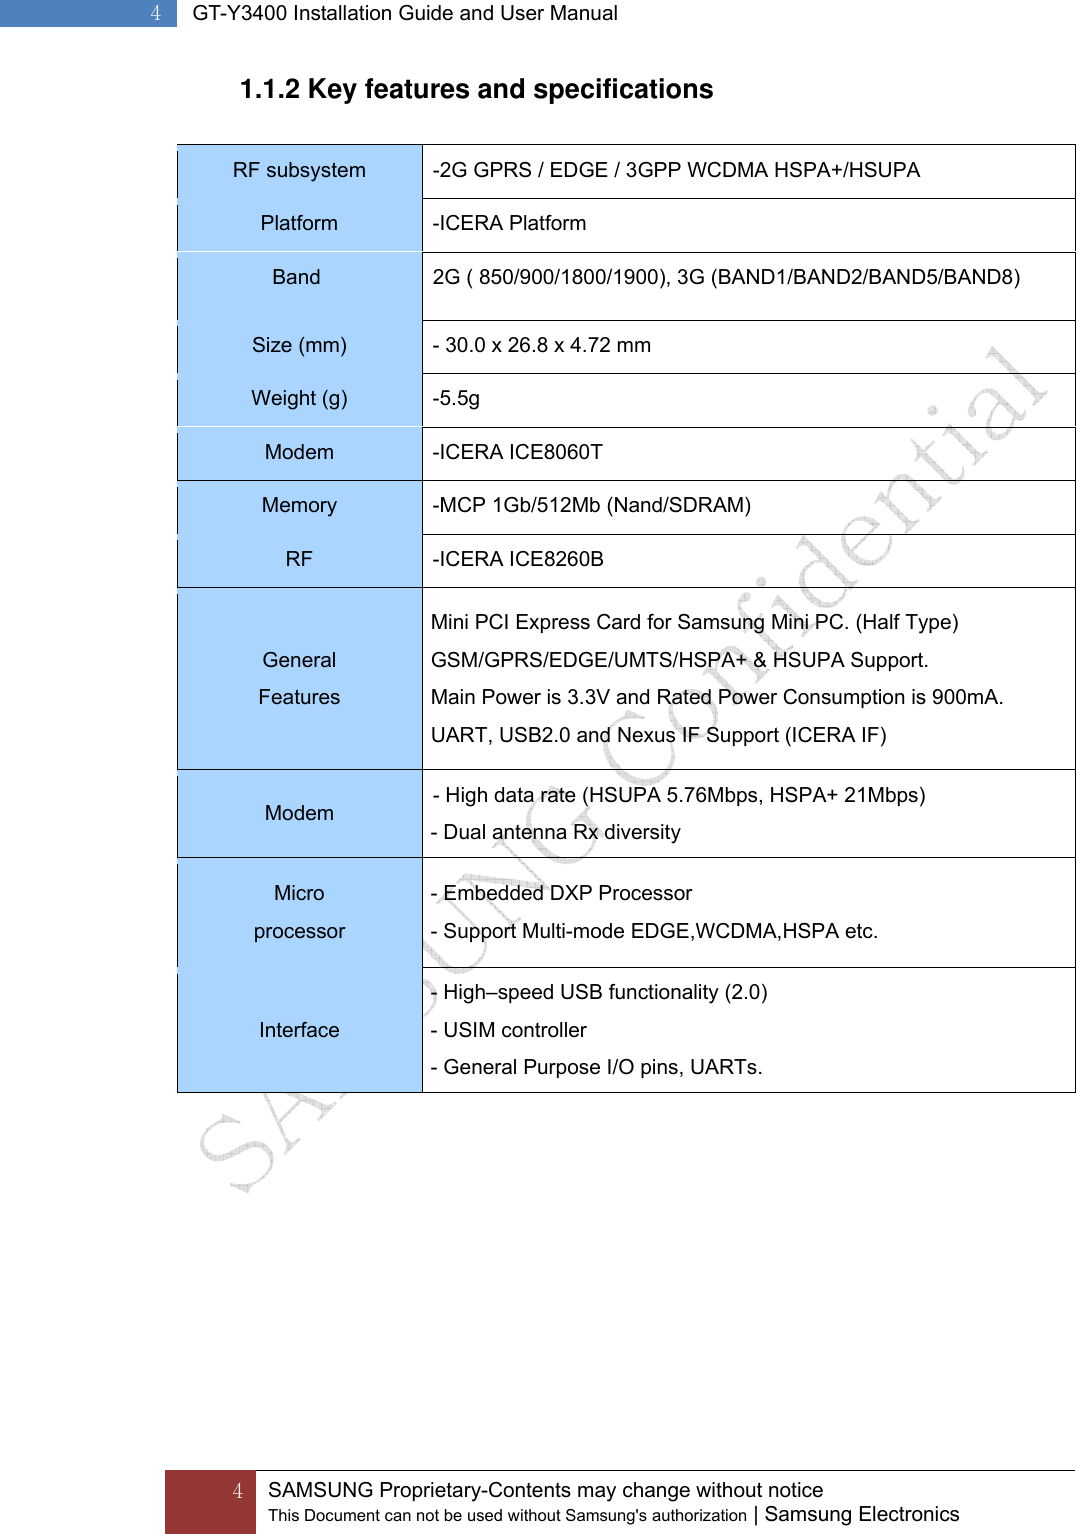  4 SAMSUNG Proprietary-Contents may change without notice This Document can not be used without Samsung&apos;s authorization | Samsung Electronics  4  GT-Y3400 Installation Guide and User Manual 1.1.2 Key features and specifications  RF subsystem  -2G GPRS / EDGE / 3GPP WCDMA HSPA+/HSUPA Platform   -ICERA Platform Band     2G ( 850/900/1800/1900), 3G (BAND1/BAND2/BAND5/BAND8) Size (mm)  - 30.0 x 26.8 x 4.72 mm Weight (g)  -5.5g Modem -ICERA ICE8060T Memory  -MCP 1Gb/512Mb (Nand/SDRAM) RF -ICERA ICE8260B General  Features Mini PCI Express Card for Samsung Mini PC. (Half Type) GSM/GPRS/EDGE/UMTS/HSPA+ &amp; HSUPA Support. Main Power is 3.3V and Rated Power Consumption is 900mA. UART, USB2.0 and Nexus IF Support (ICERA IF) Modem  - High data rate (HSUPA 5.76Mbps, HSPA+ 21Mbps) - Dual antenna Rx diversity Micro processor - Embedded DXP Processor - Support Multi-mode EDGE,WCDMA,HSPA etc. Interface - High–speed USB functionality (2.0) - USIM controller - General Purpose I/O pins, UARTs.  